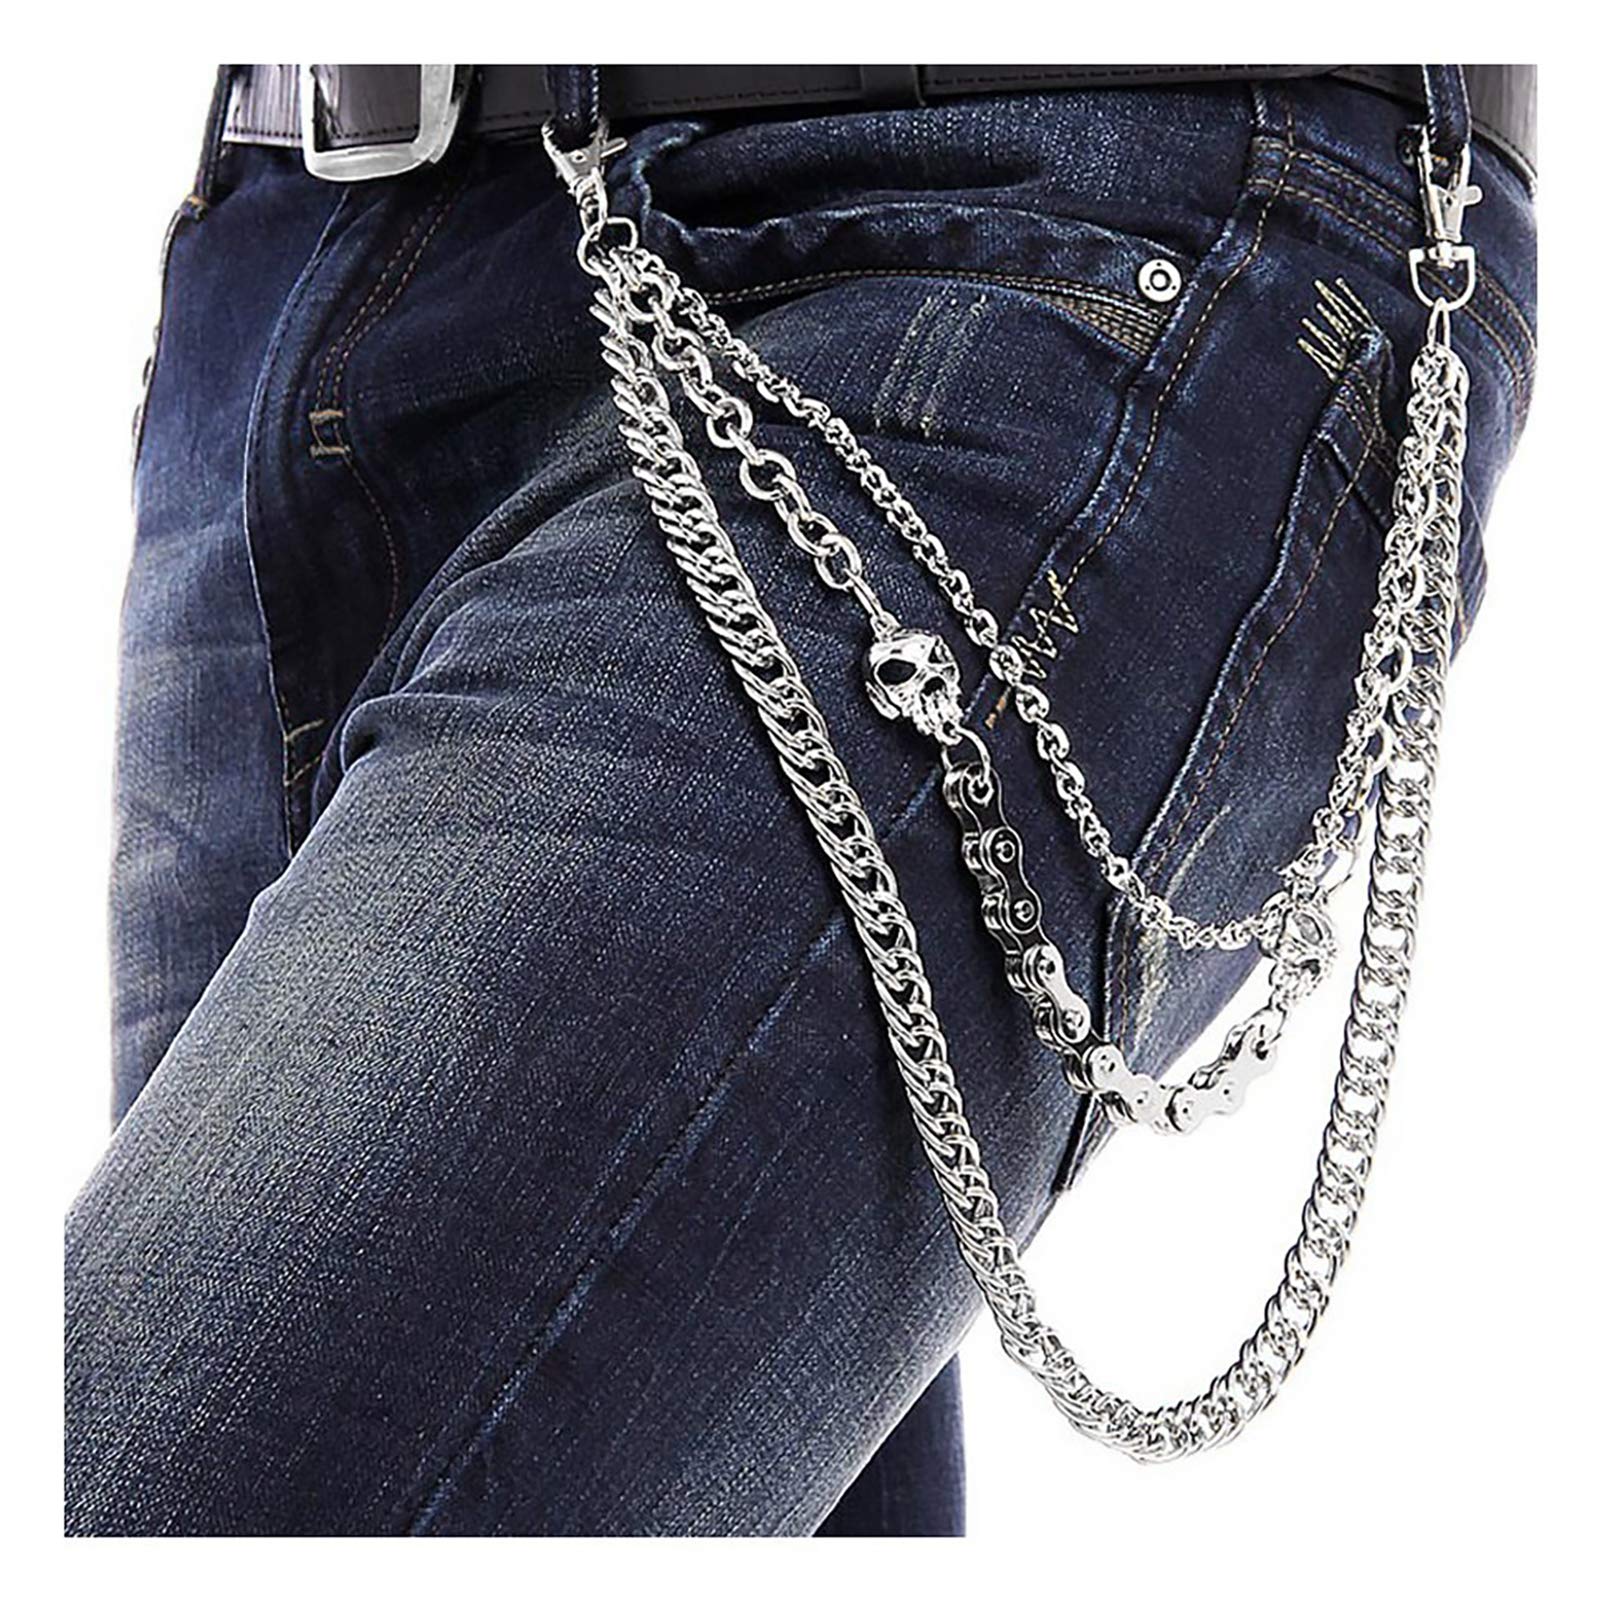 Exquisite Pants Skeleton Chain Casual Jeans Trousers Skull Chain for Women  Men | eBay